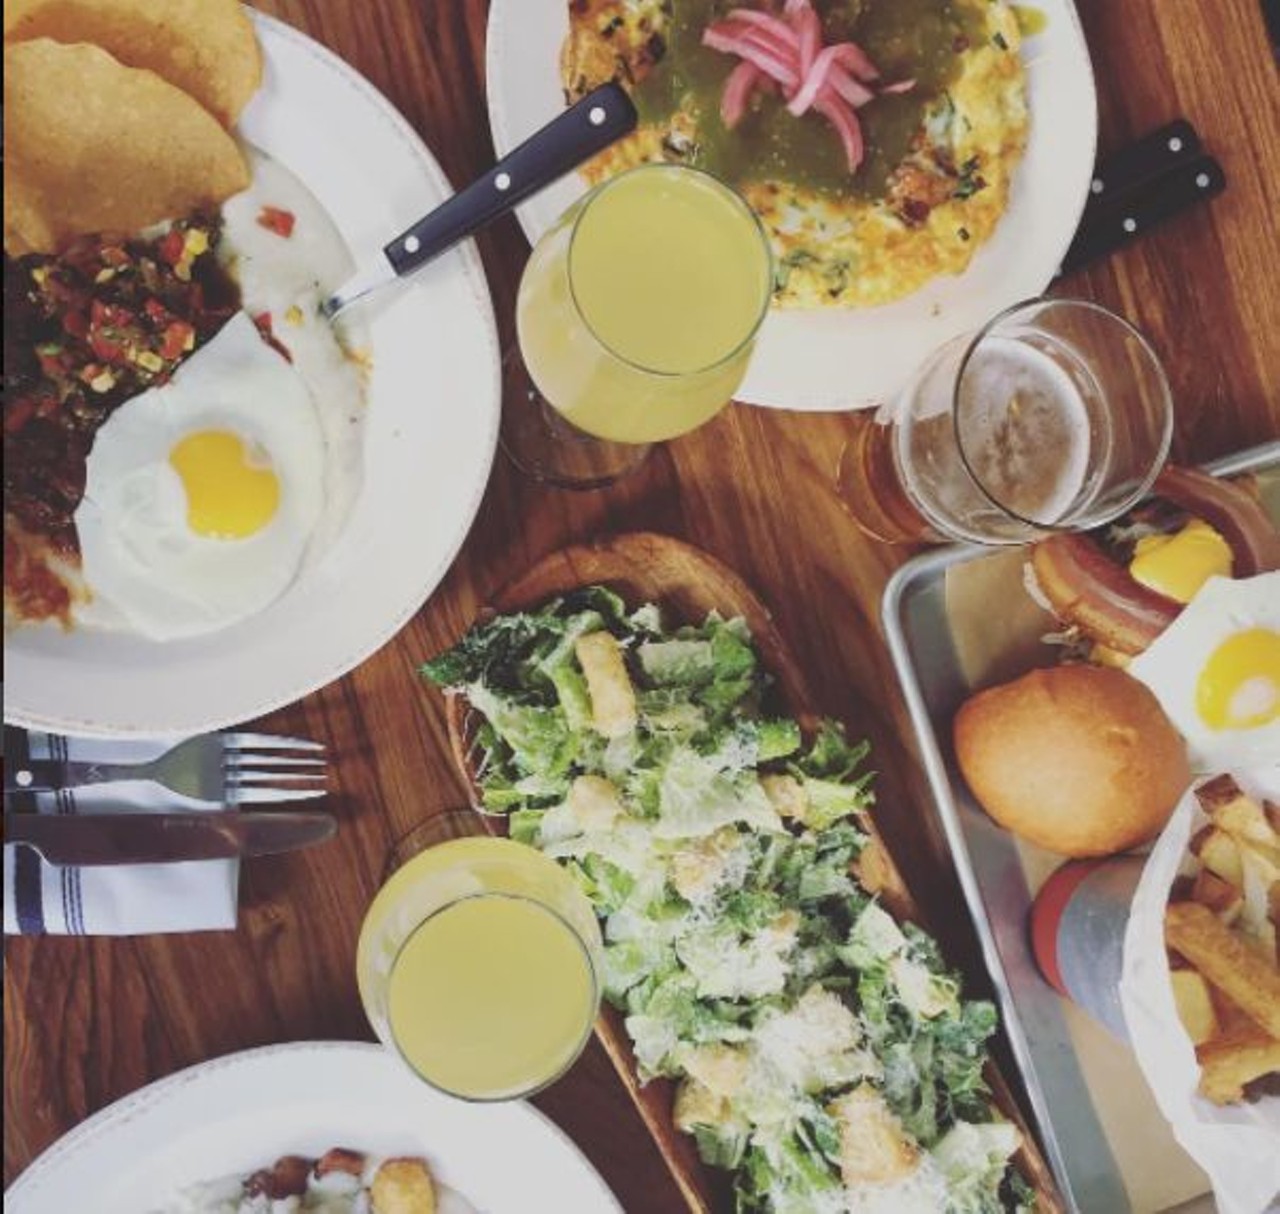 North Quarter Tavern
Sundays from 11 a.m.to 3 p.m. at this downtown Orlando hotspot has mimosas offered at the lower price of $10.
861 N. Orange Ave., 407-757-0930   
Photo via maxximillianoo/Instagram